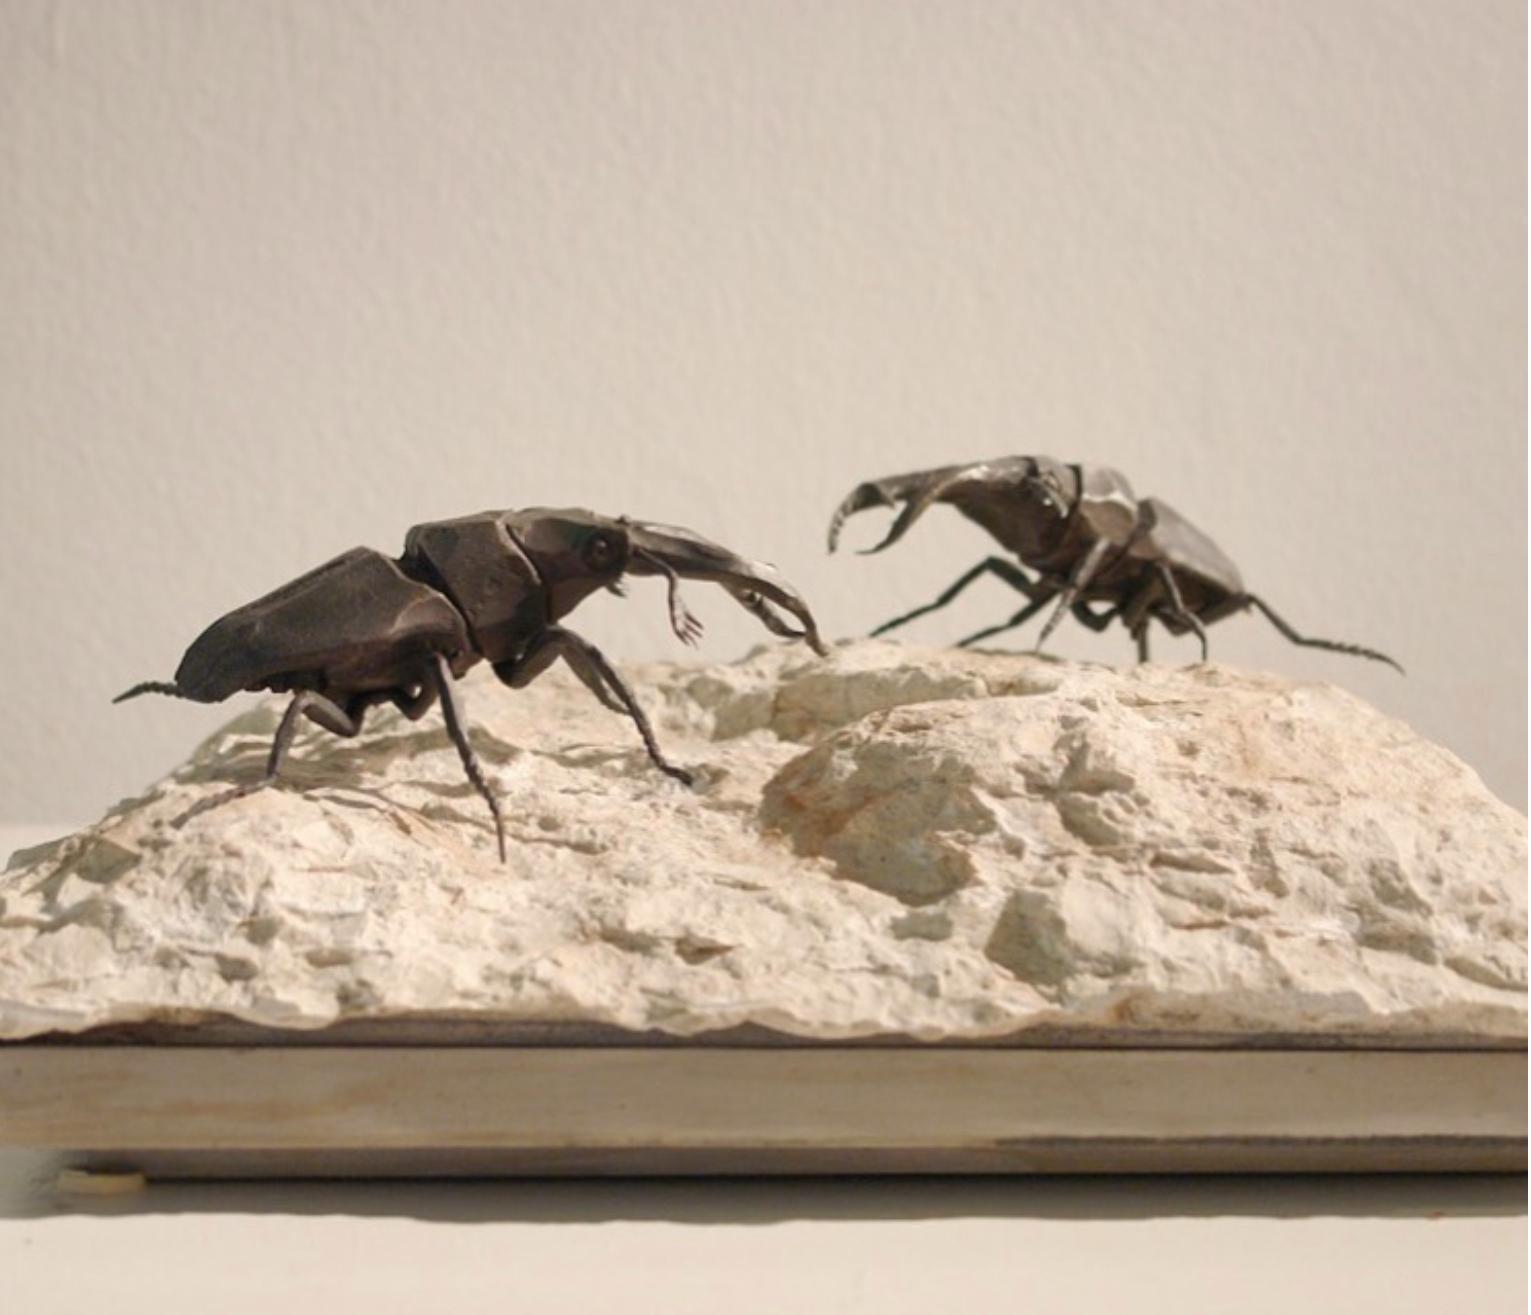 Ivan Zanoni Figurative Sculpture - Pair of wrought iron stag beetles on a river stone all "framed" by a steel tray